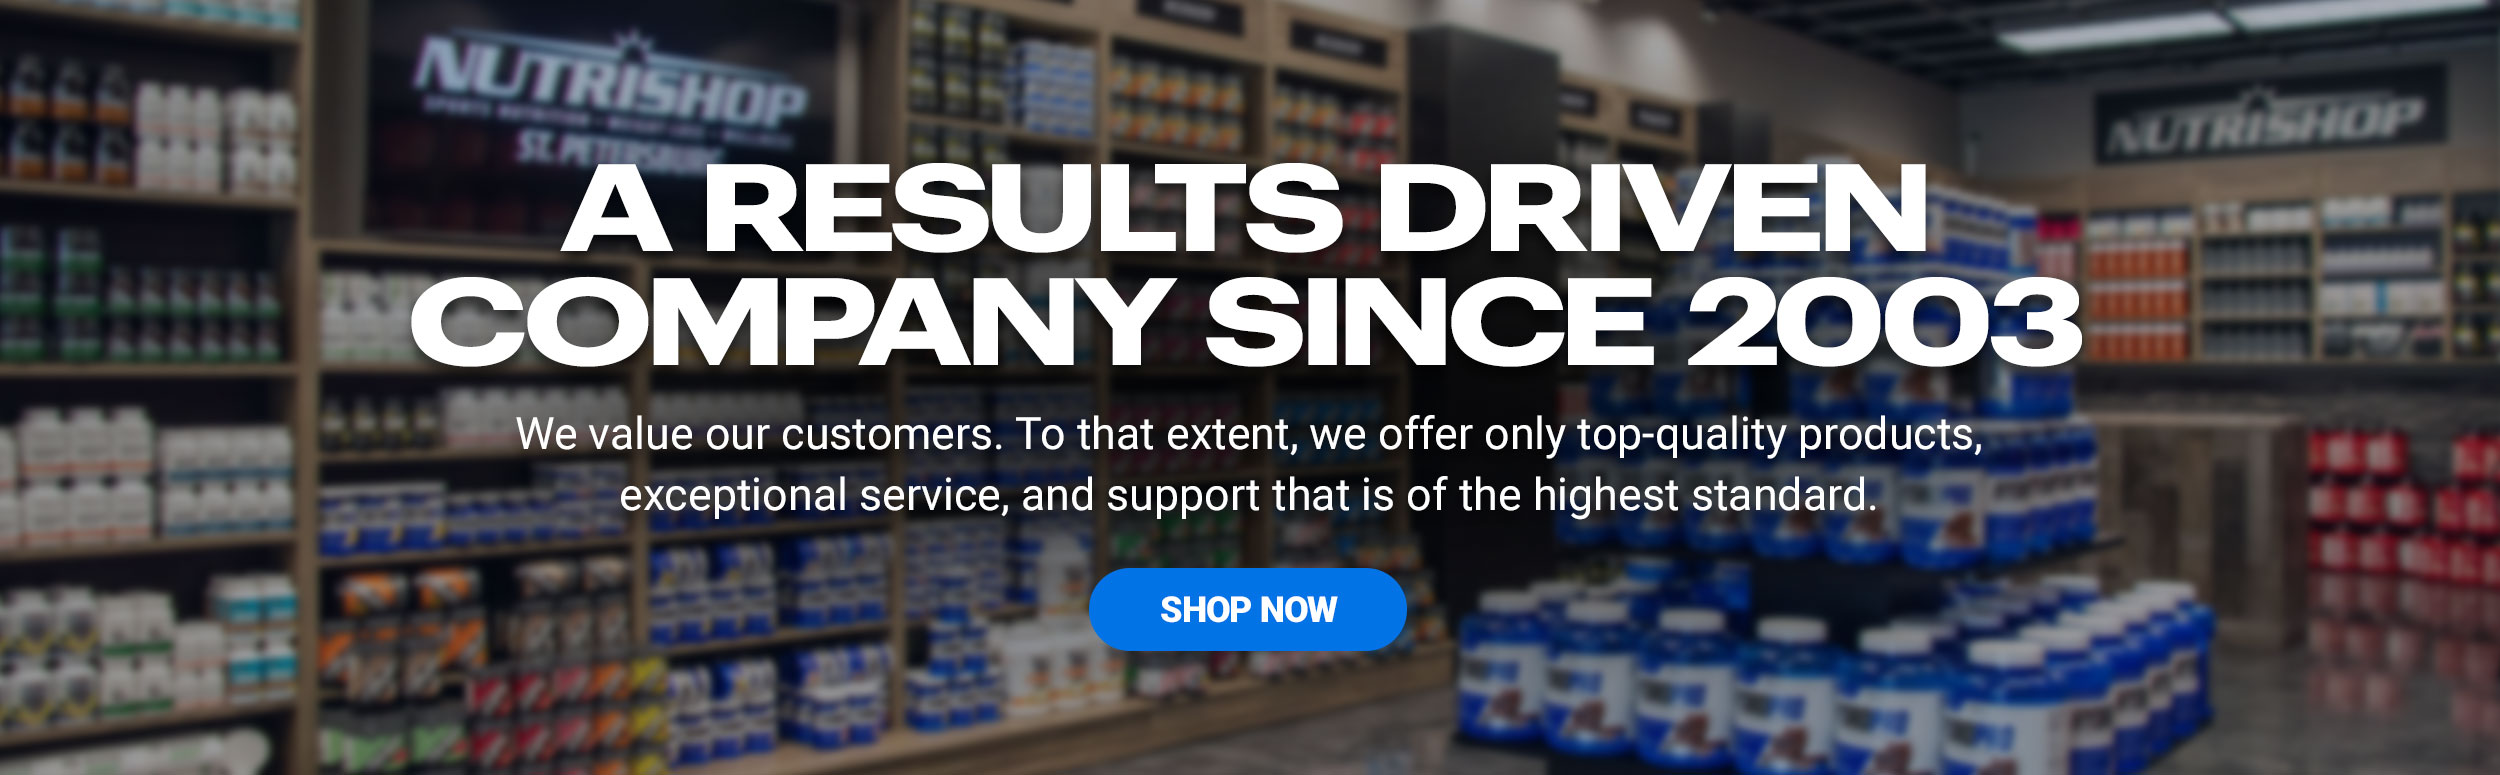 Nutrishop. A results-driven company since 2003.